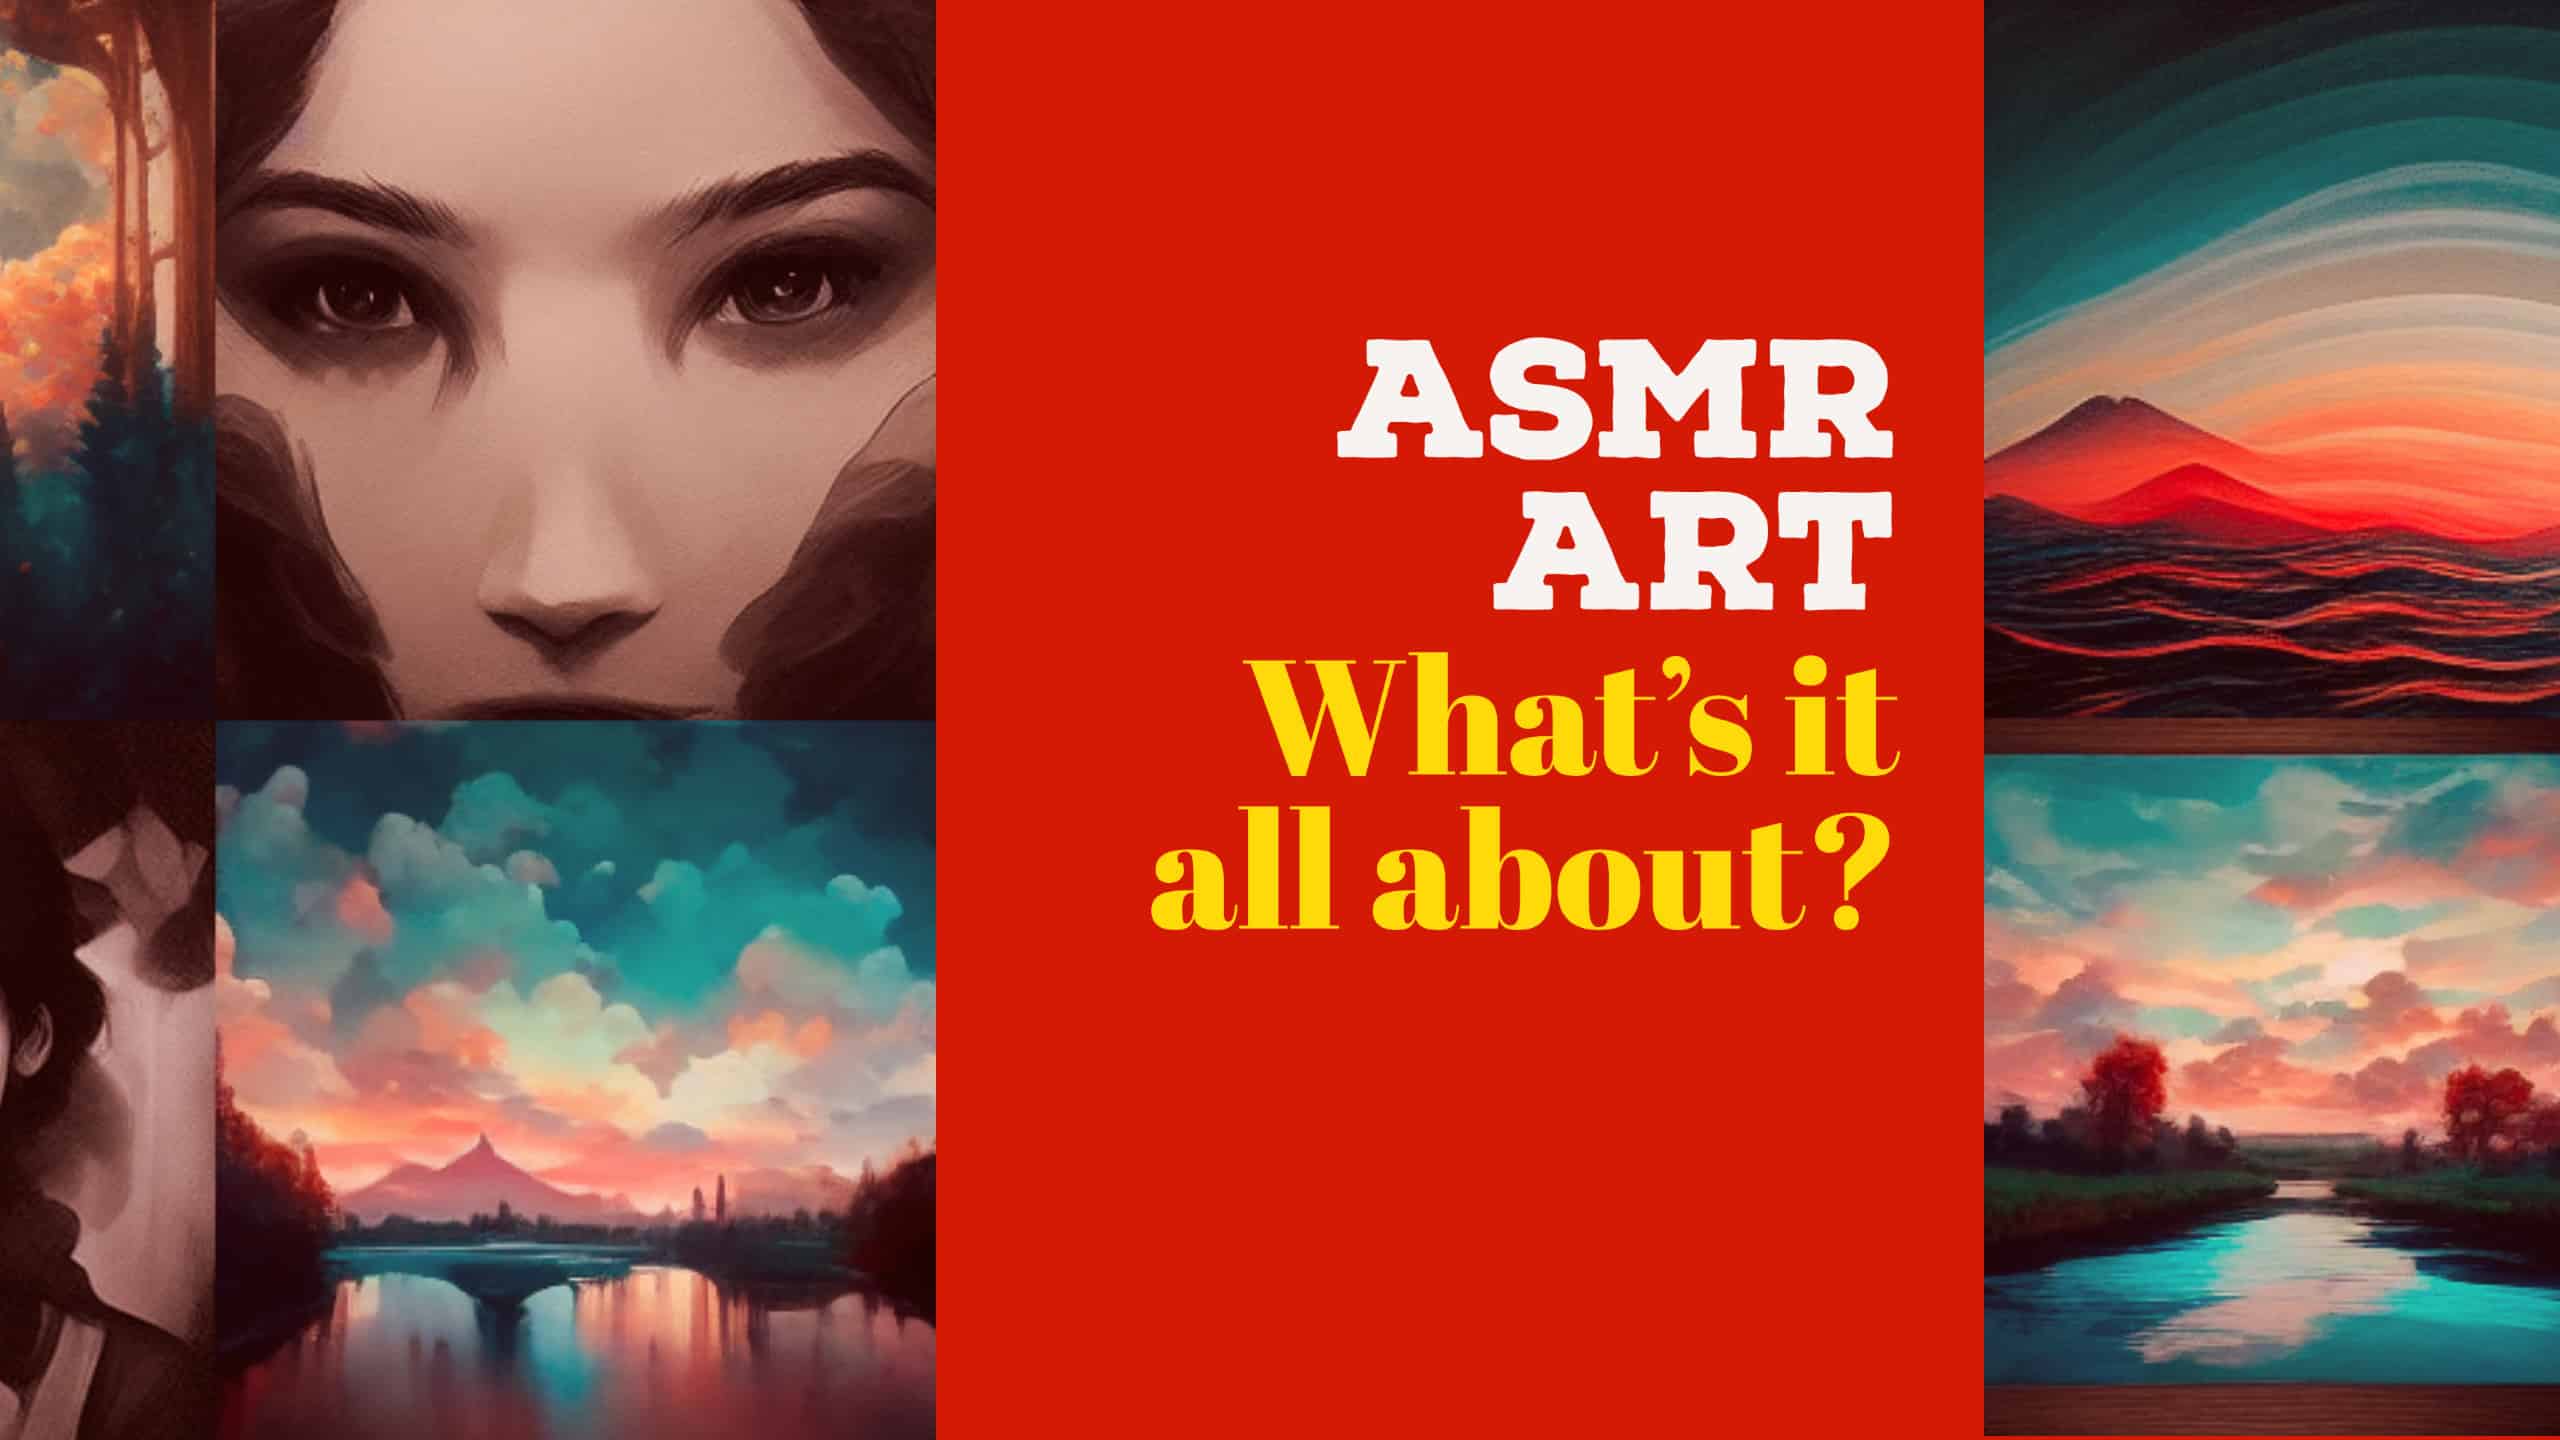 ASMR ART : What’s it all about?